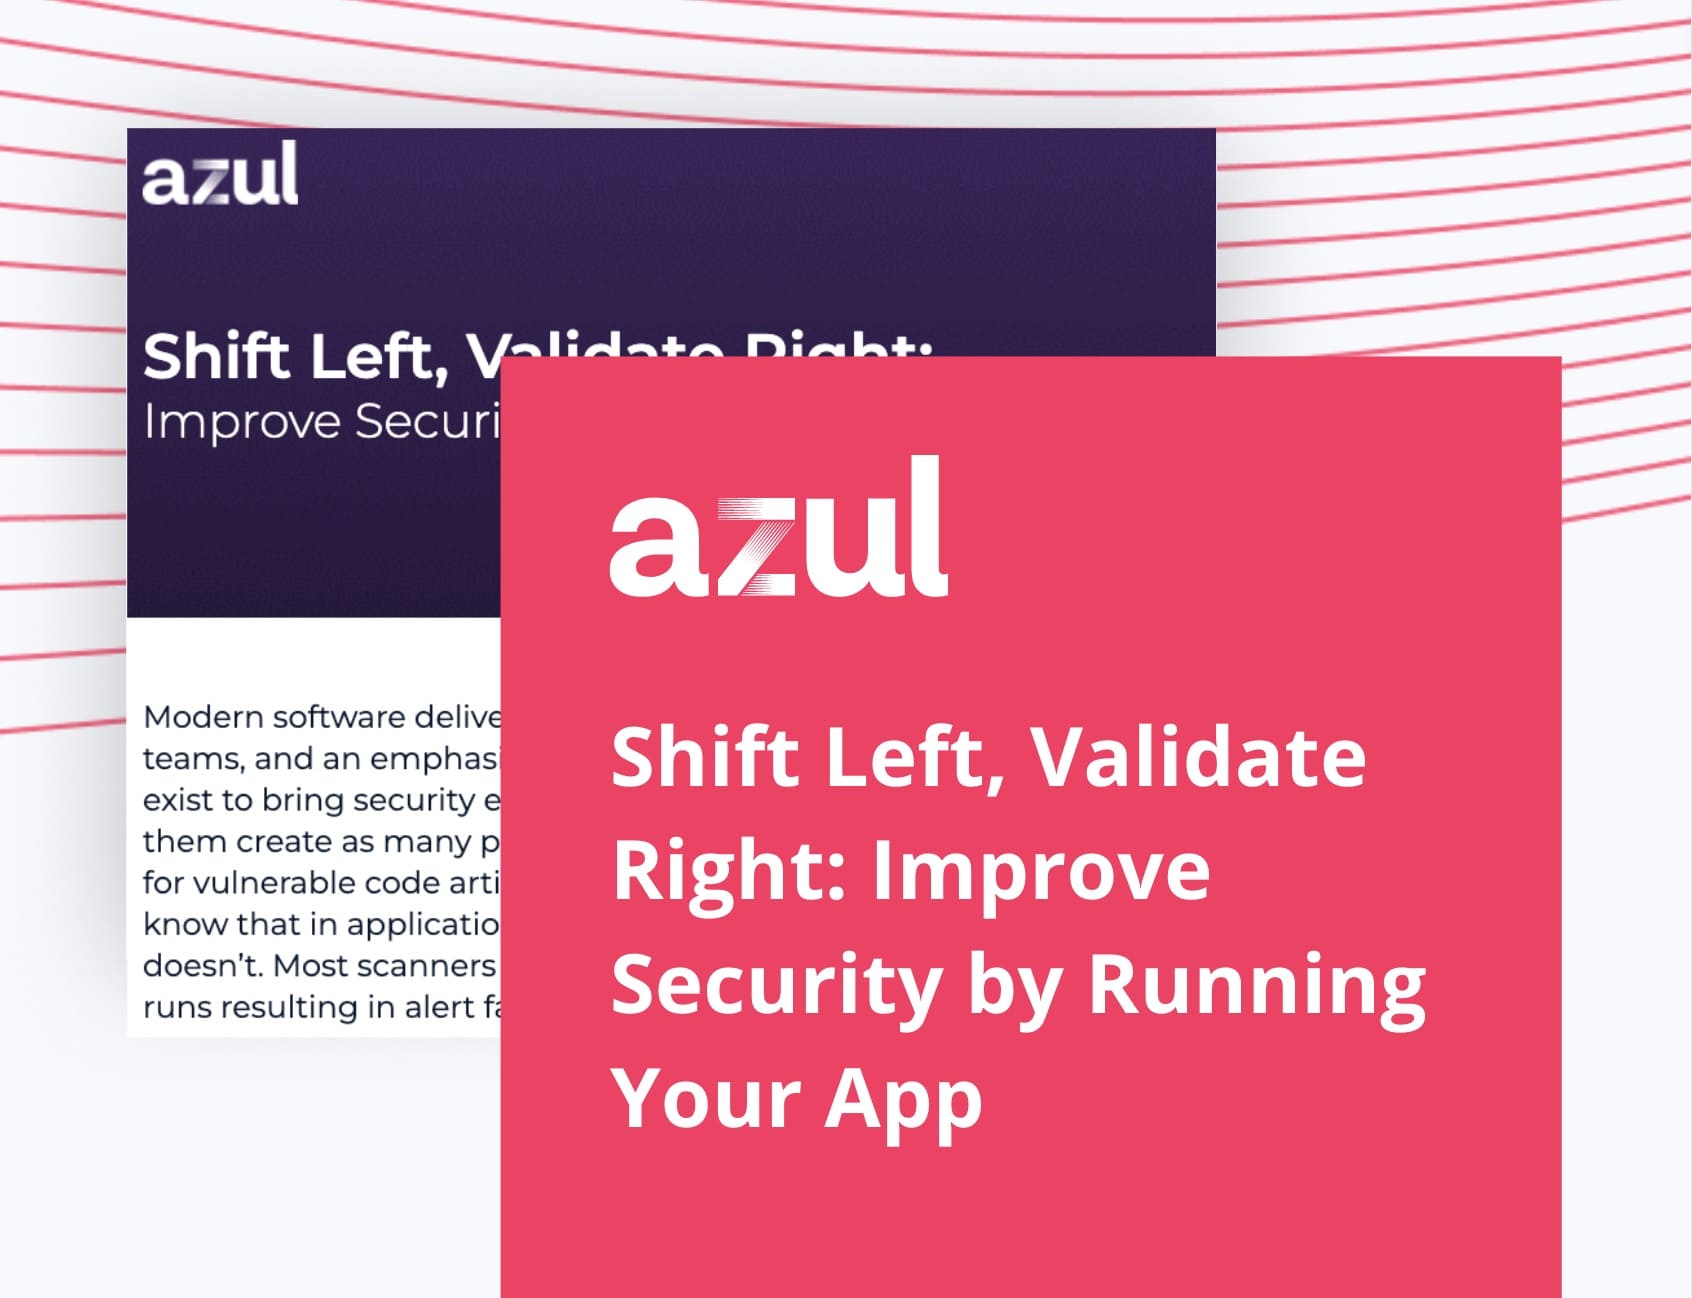 Shift Left, Validate Right - Improve Security by Running Your App